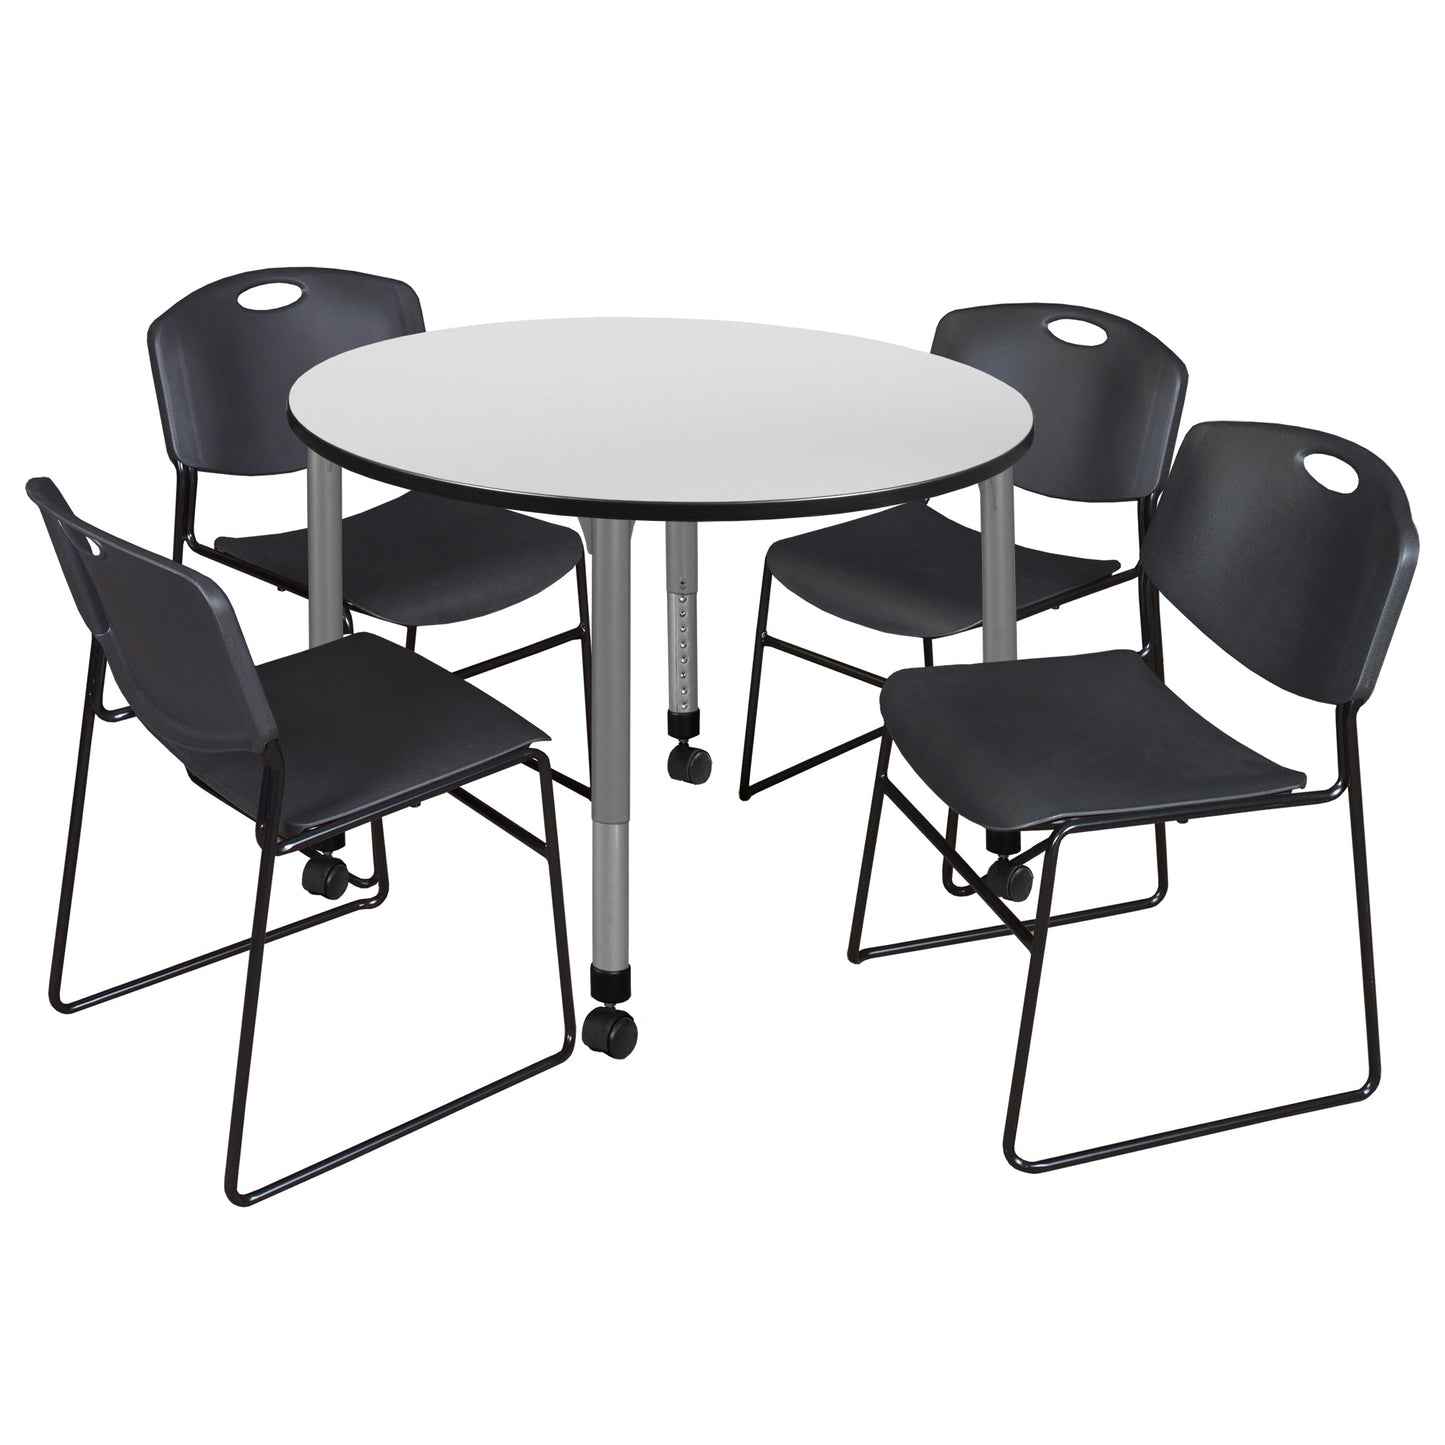 Regency Kee 48 in. Round Adjustable Classroom Table & 4 Zeng Stack Chairs